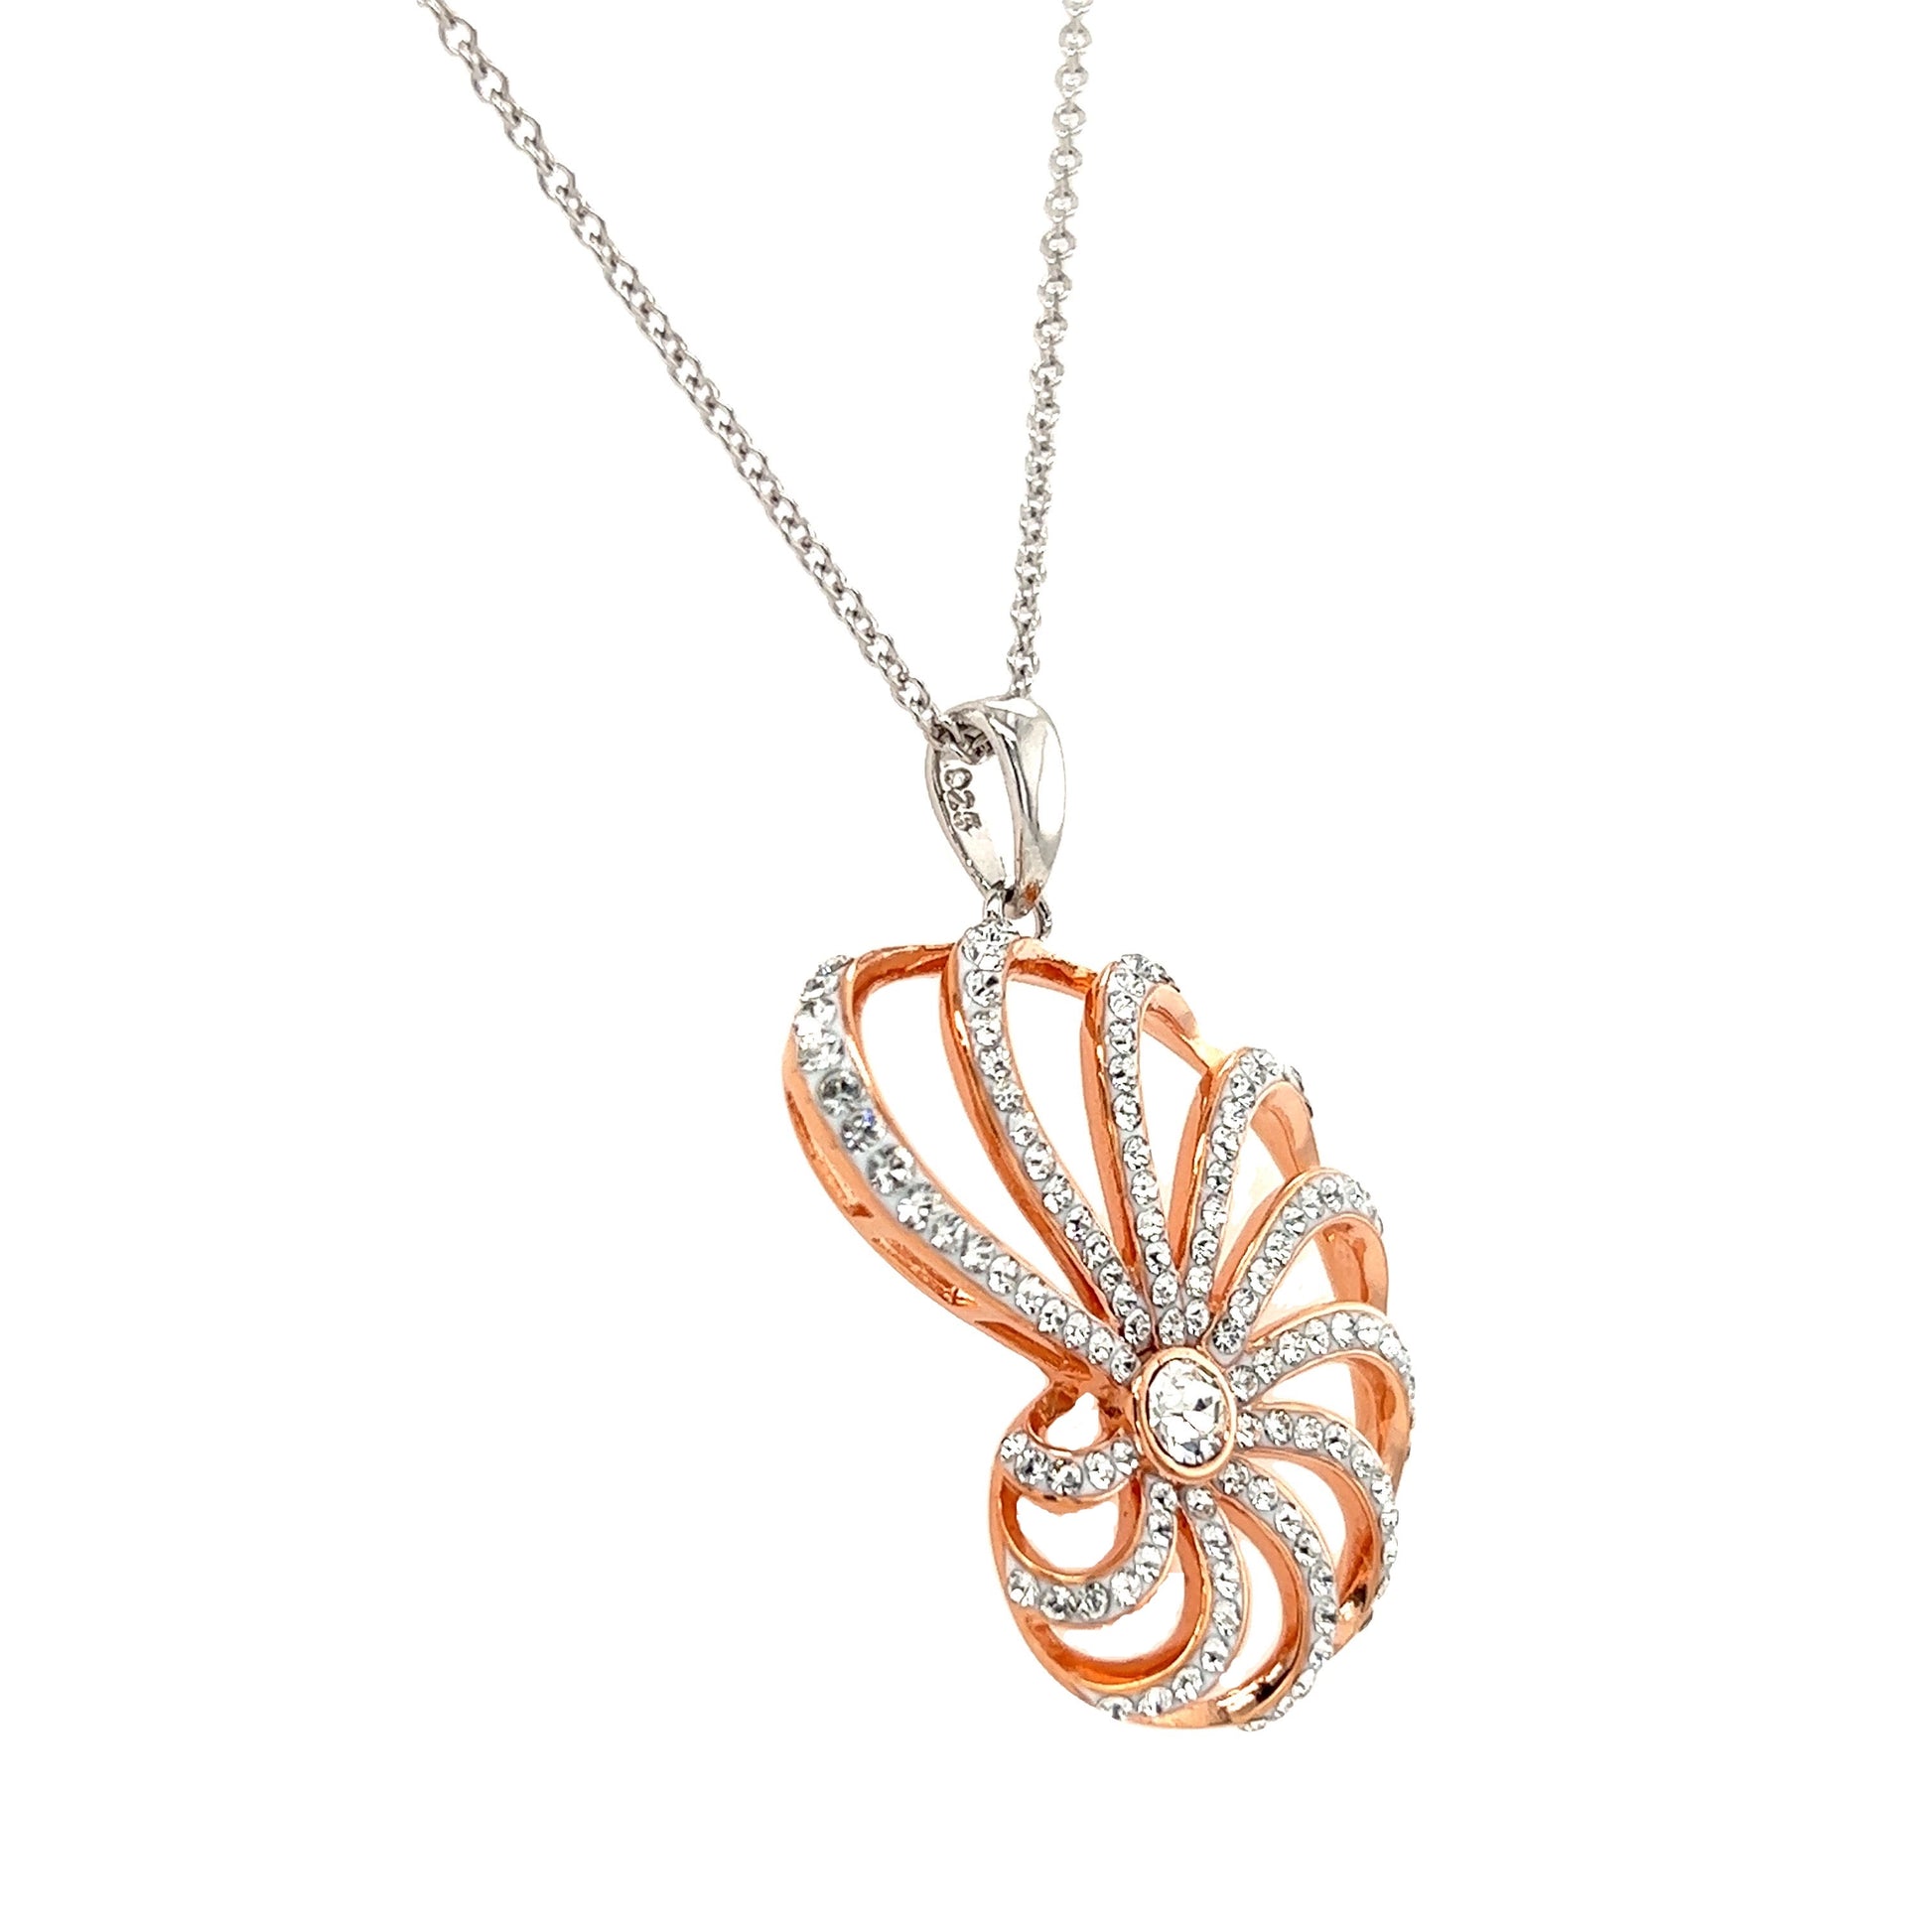 Nautilus Shell Necklace with Rose Gold Plate and White Crystals in Sterling Silver Left Side View